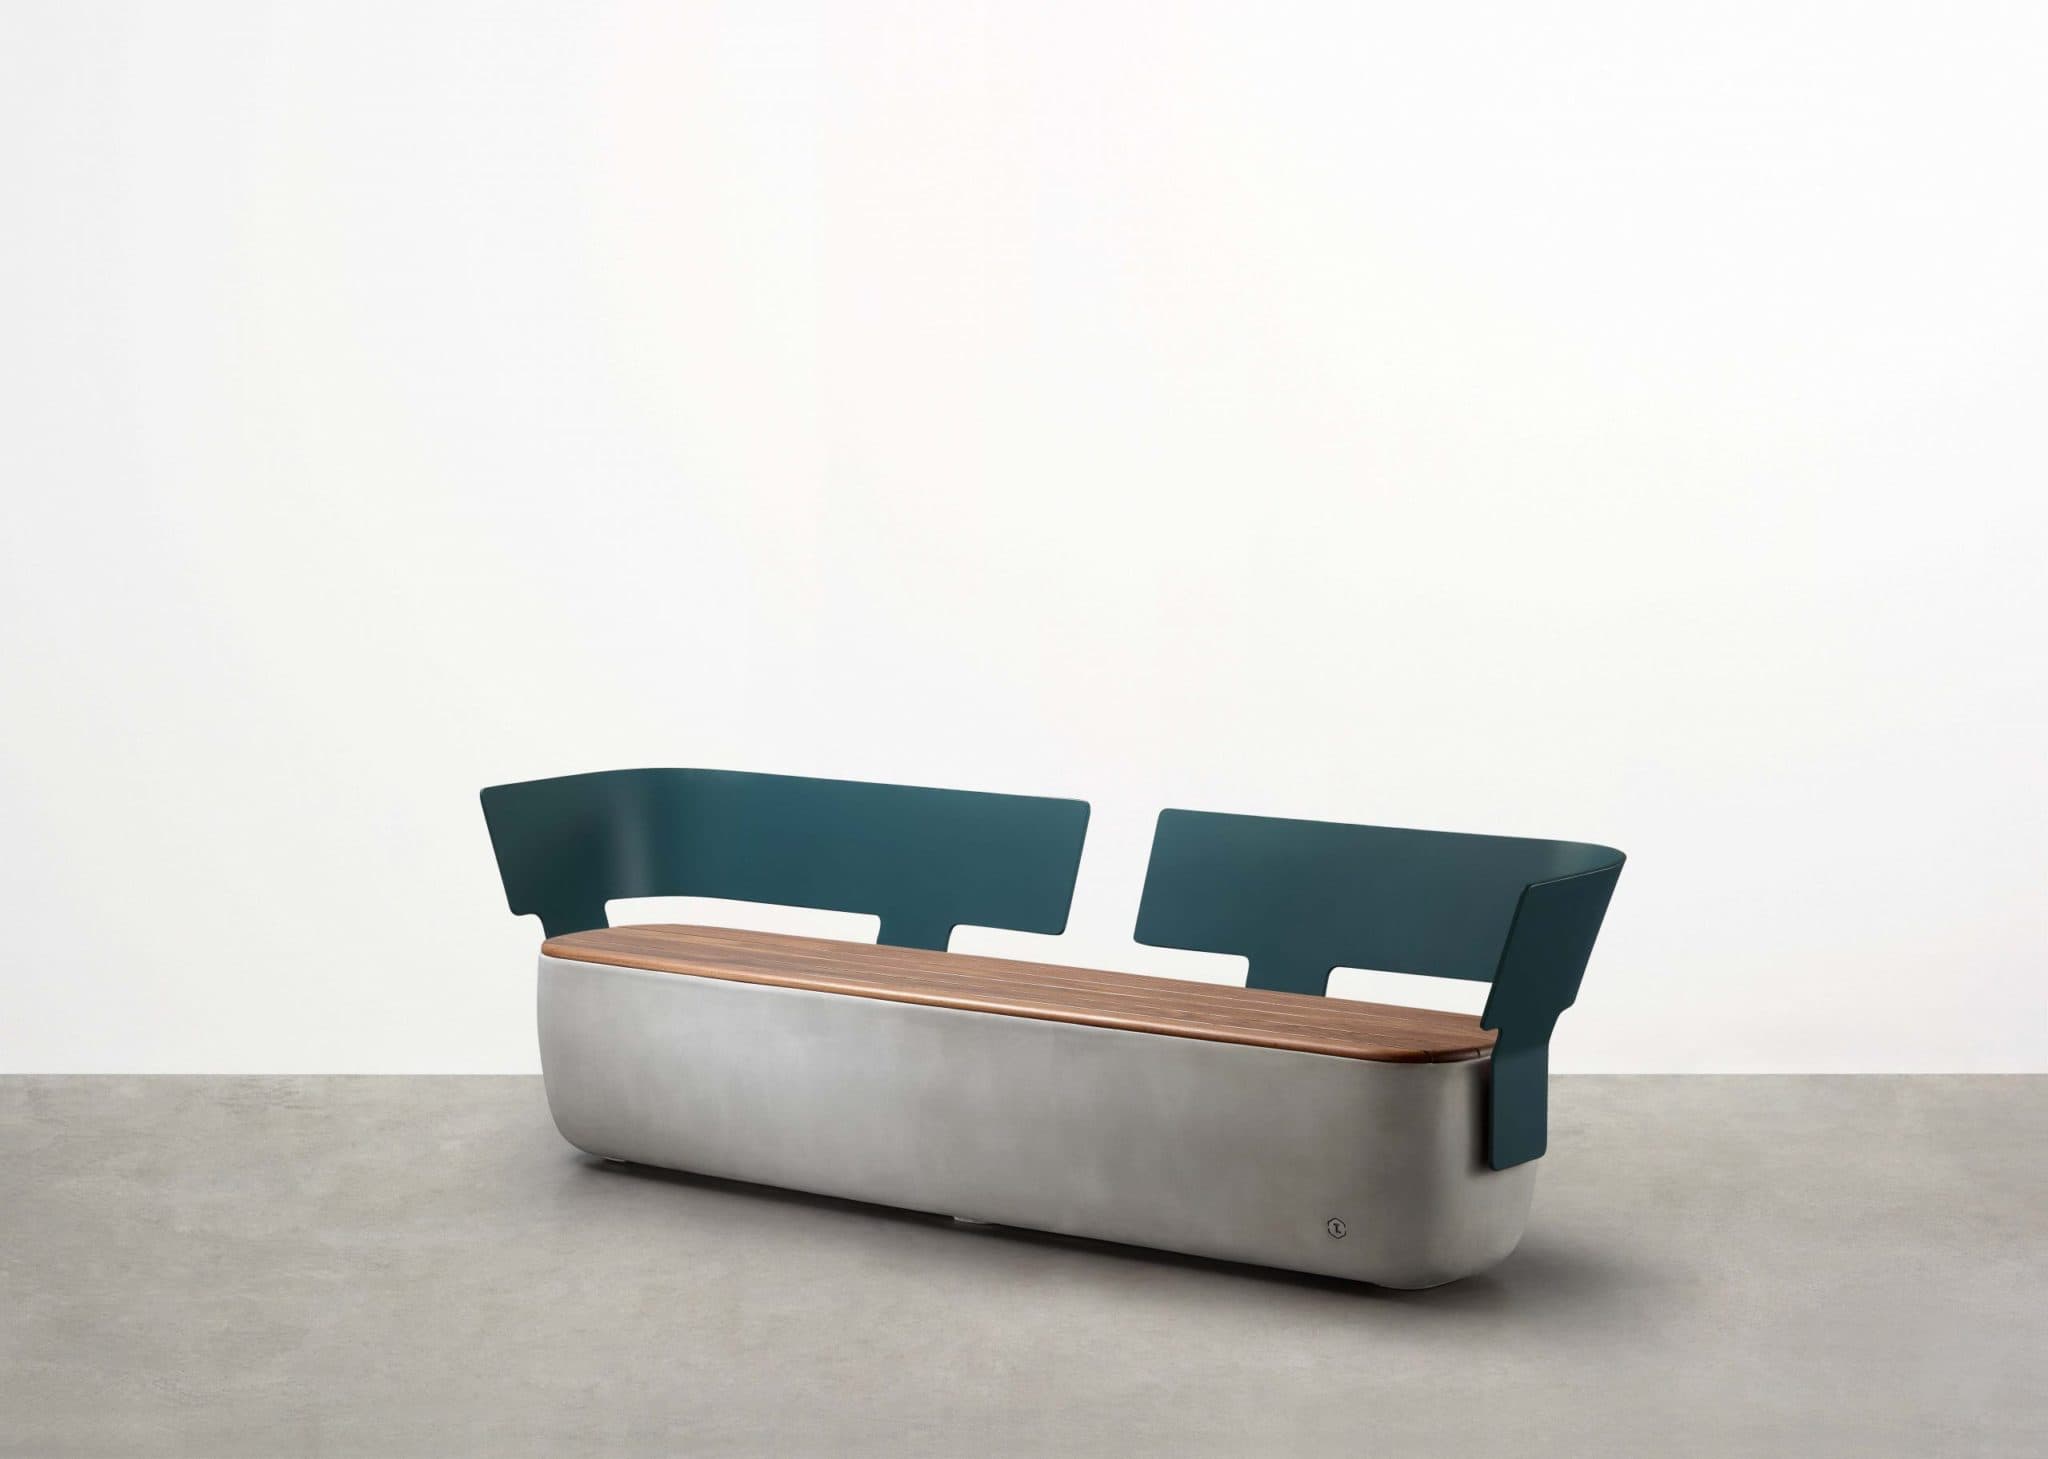 Designed by Adam Goodrum for Tait, the Scape Long Module is a long concrete bench seat that forms part of a fluid, triadic modular system.